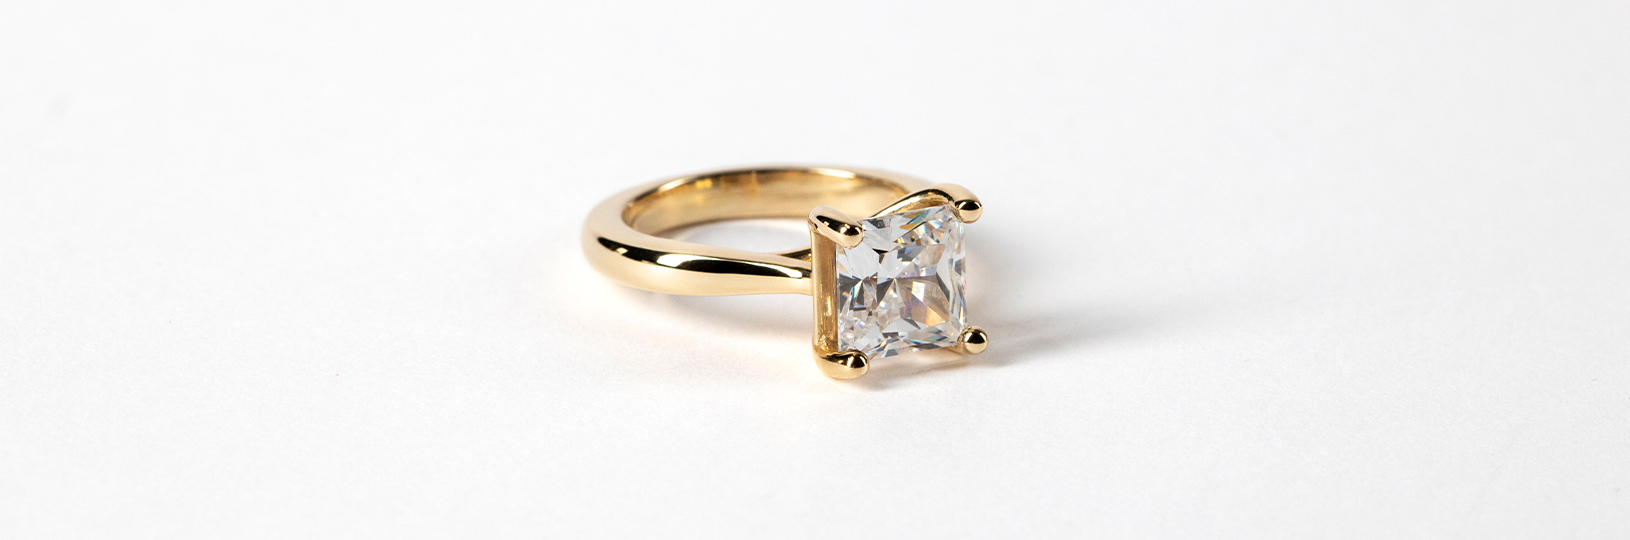 small yellow gold engagement ring